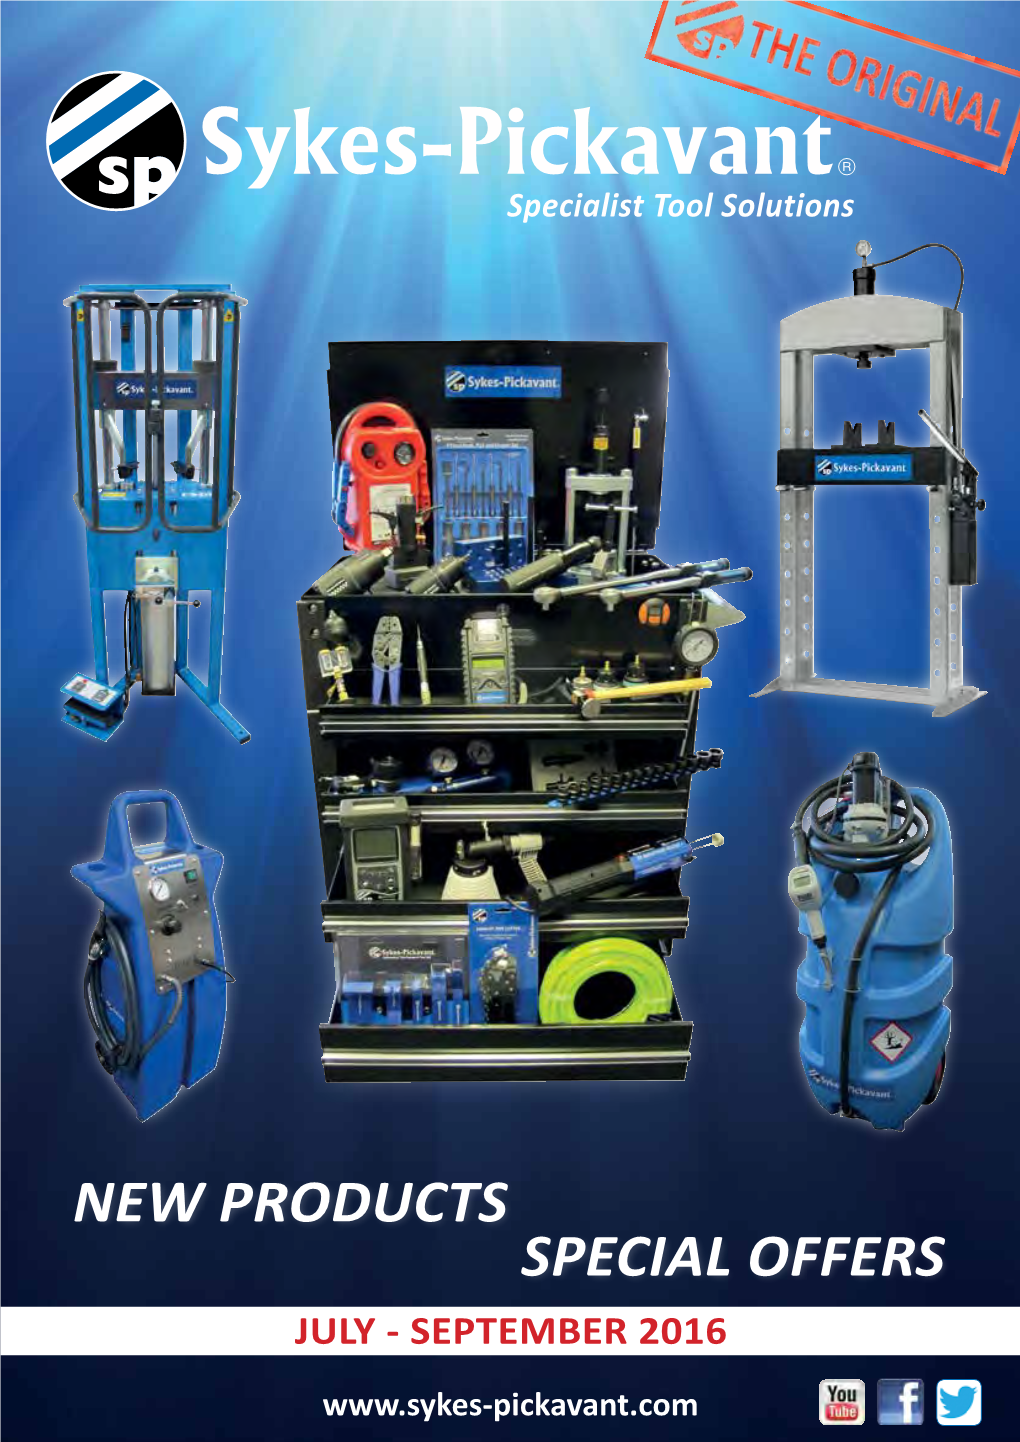 New Products Special Offers July - September 2016